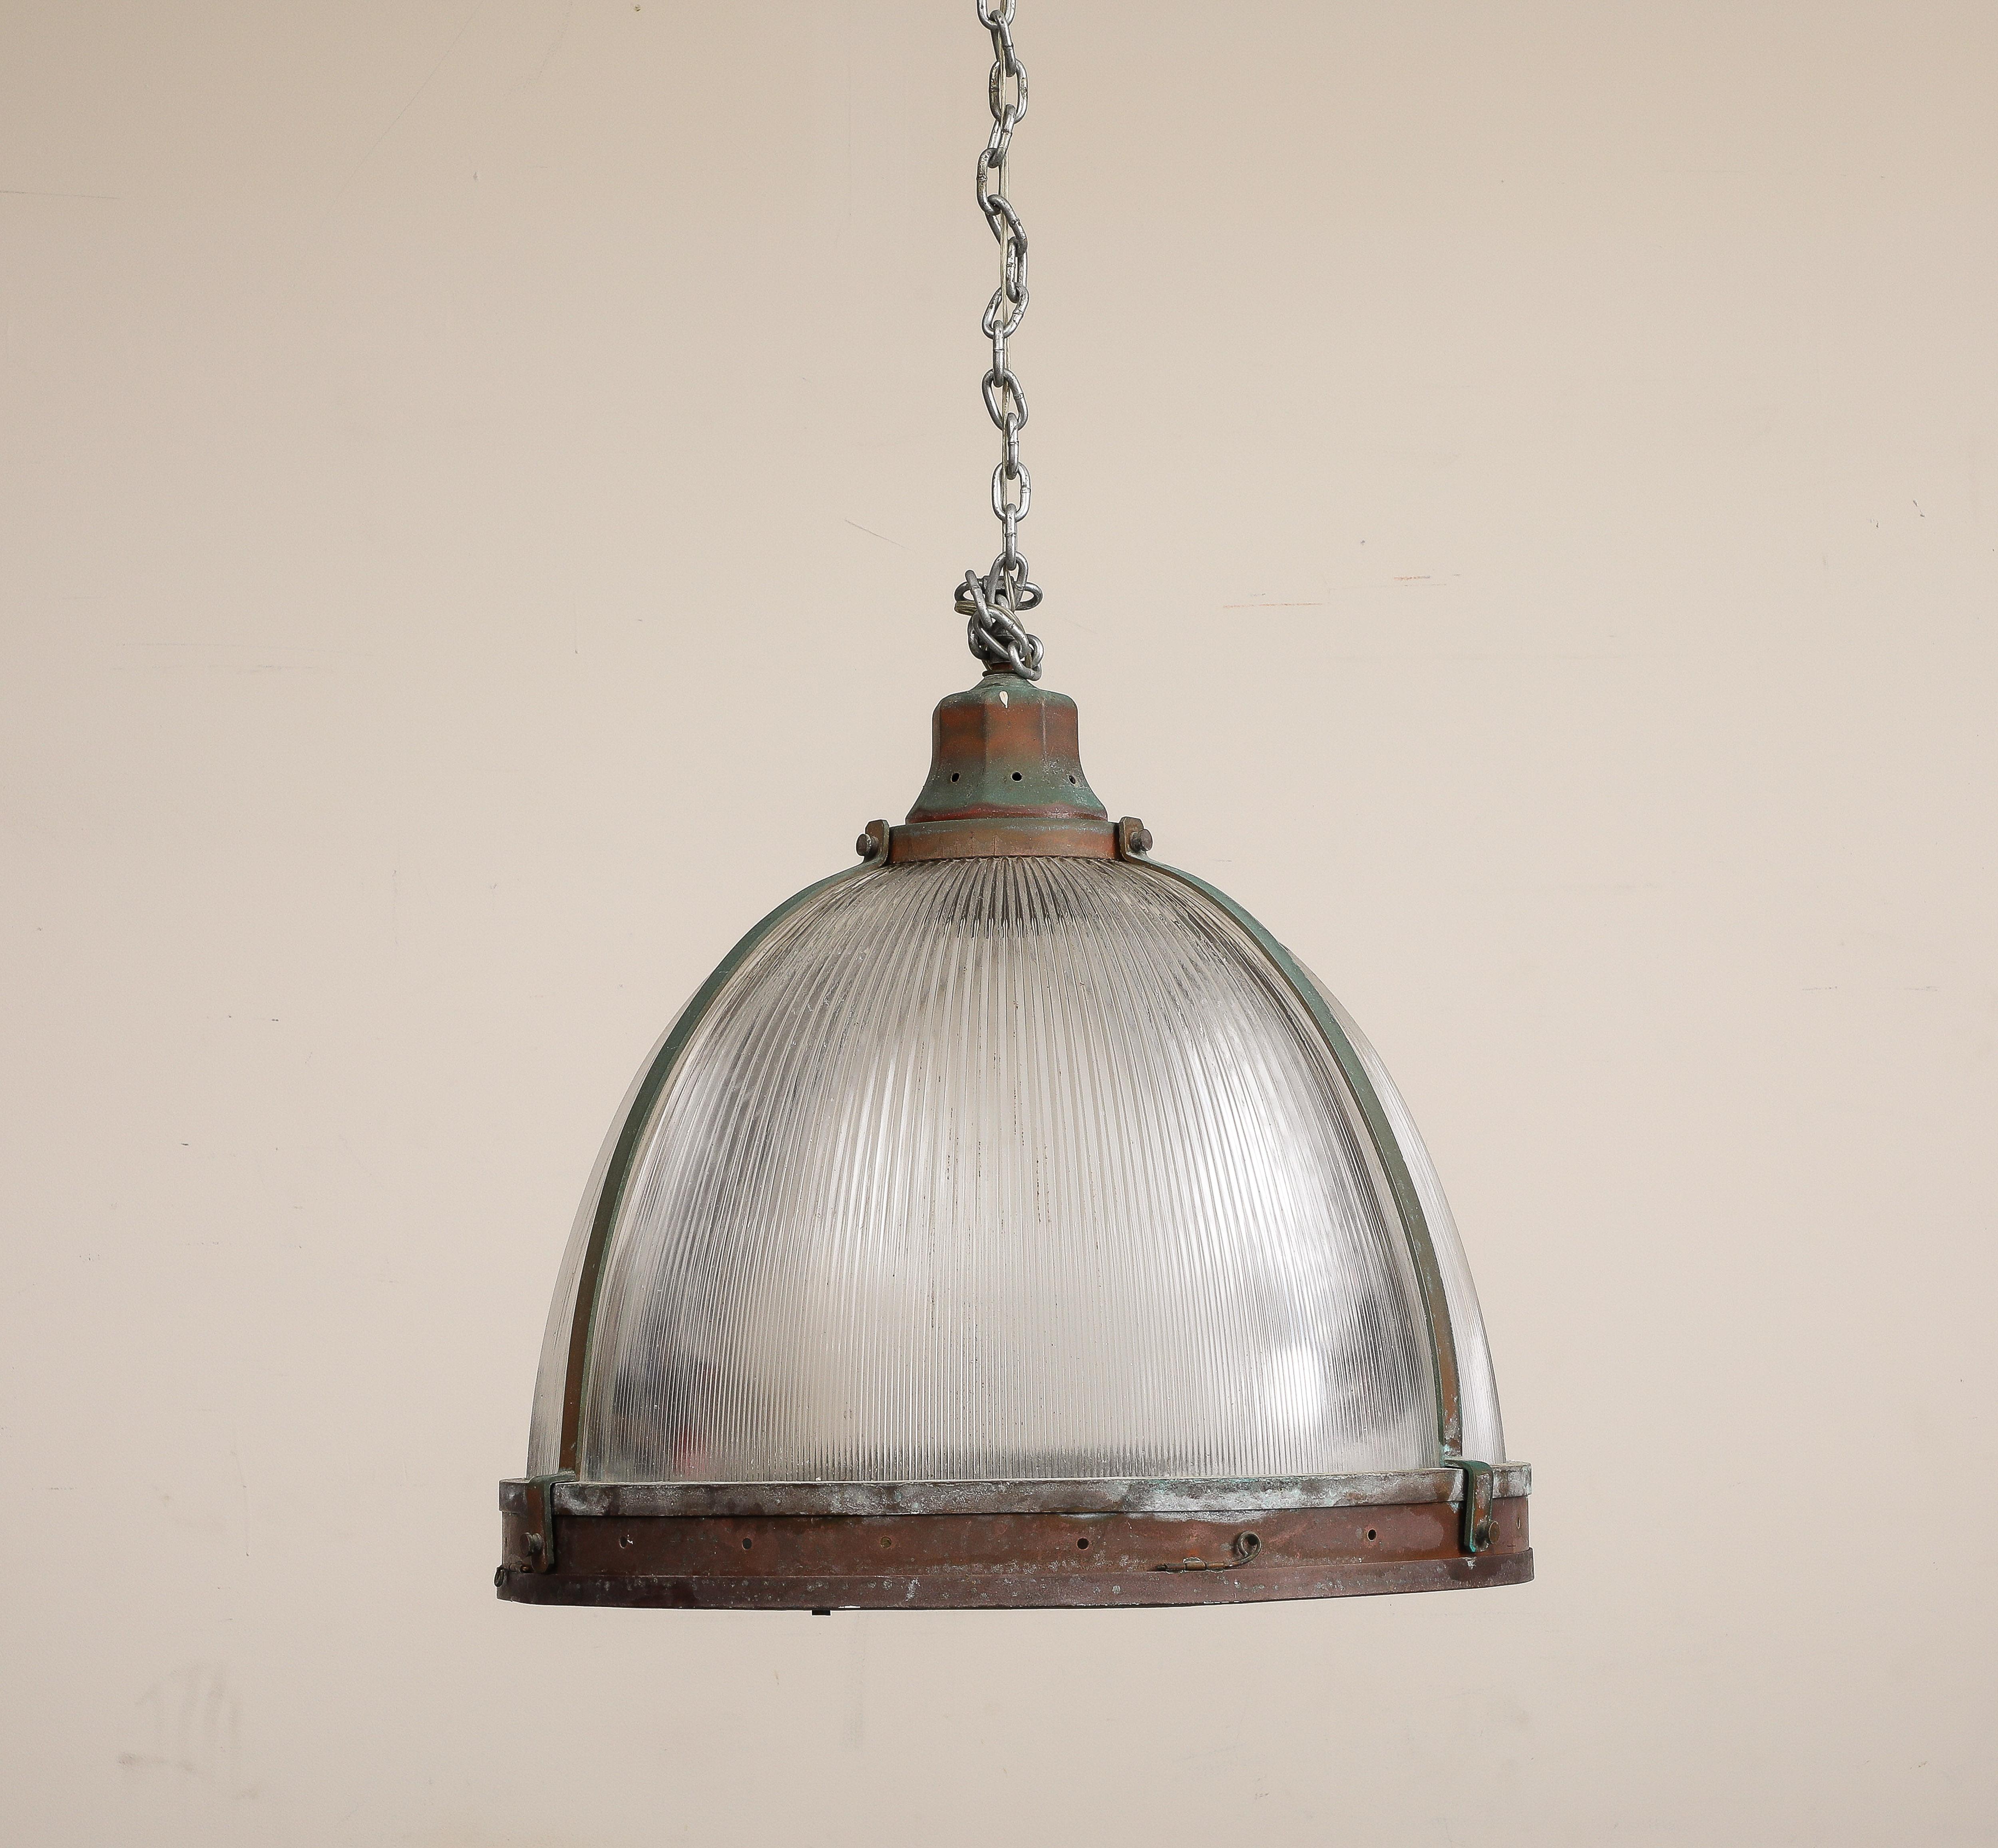 Vintage industrial copper pendant light with reeded glass. 20th century. Copper is oxidized as shown, nice patina. 

chain is 85